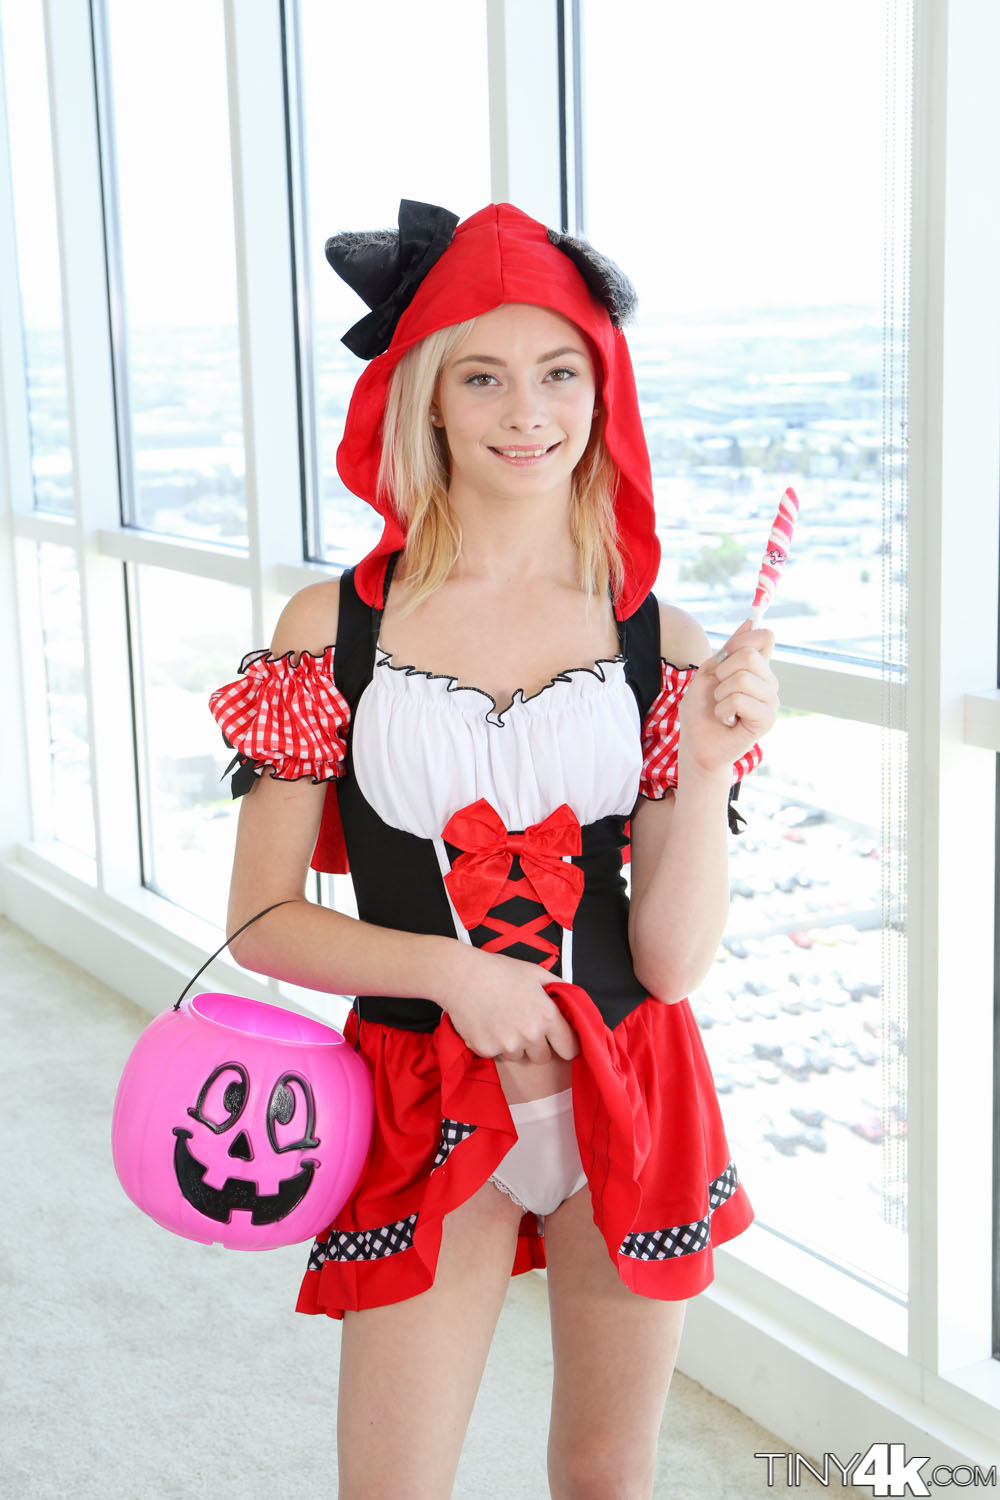 Horny Red Riding Hood Porn - TW Pornstars - 1 pic. Tiny_4k. Twitter. Who would've thought Little Red  Riding Hood was such a #horny. 7:38 PM - 12 Oct 2020